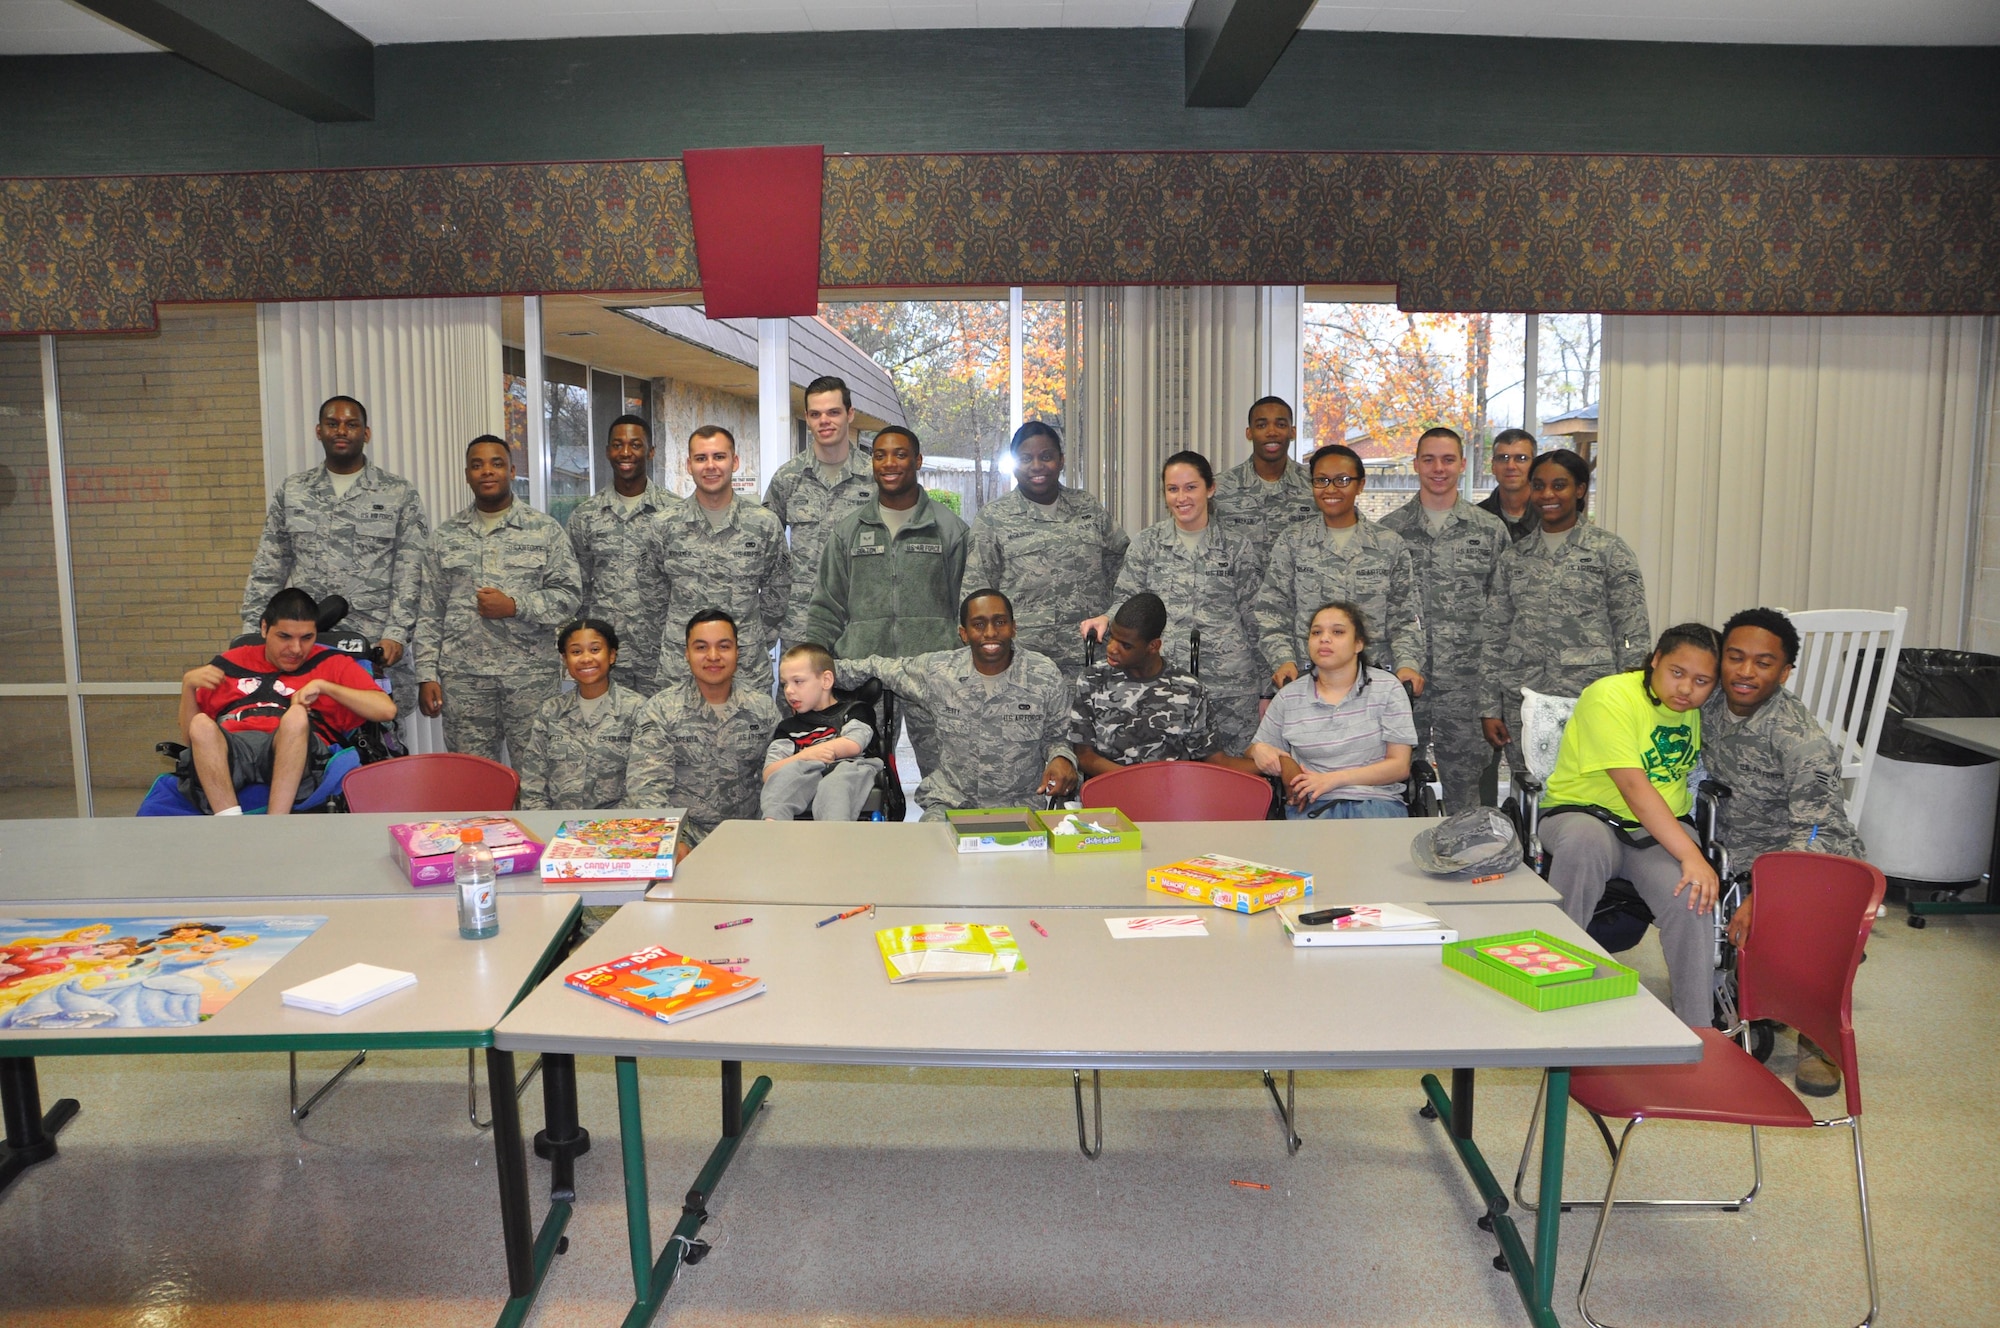 Sixteen Airmen from the 908th Airlift Wing’s Airmen Committed to Excellence Club visited the Montgomery Children’s Specialty Clinic December 4, 2016 to spread holiday cheer to the 52 patients at the clinic. The ACES Club is comprised of junior enlisted members of the 908th and they plan to continue their community outreach efforts with canned food drives, events for the veterans home and for the homeless in the area. (U.S. Air Force photo by Bradley J. Clark)